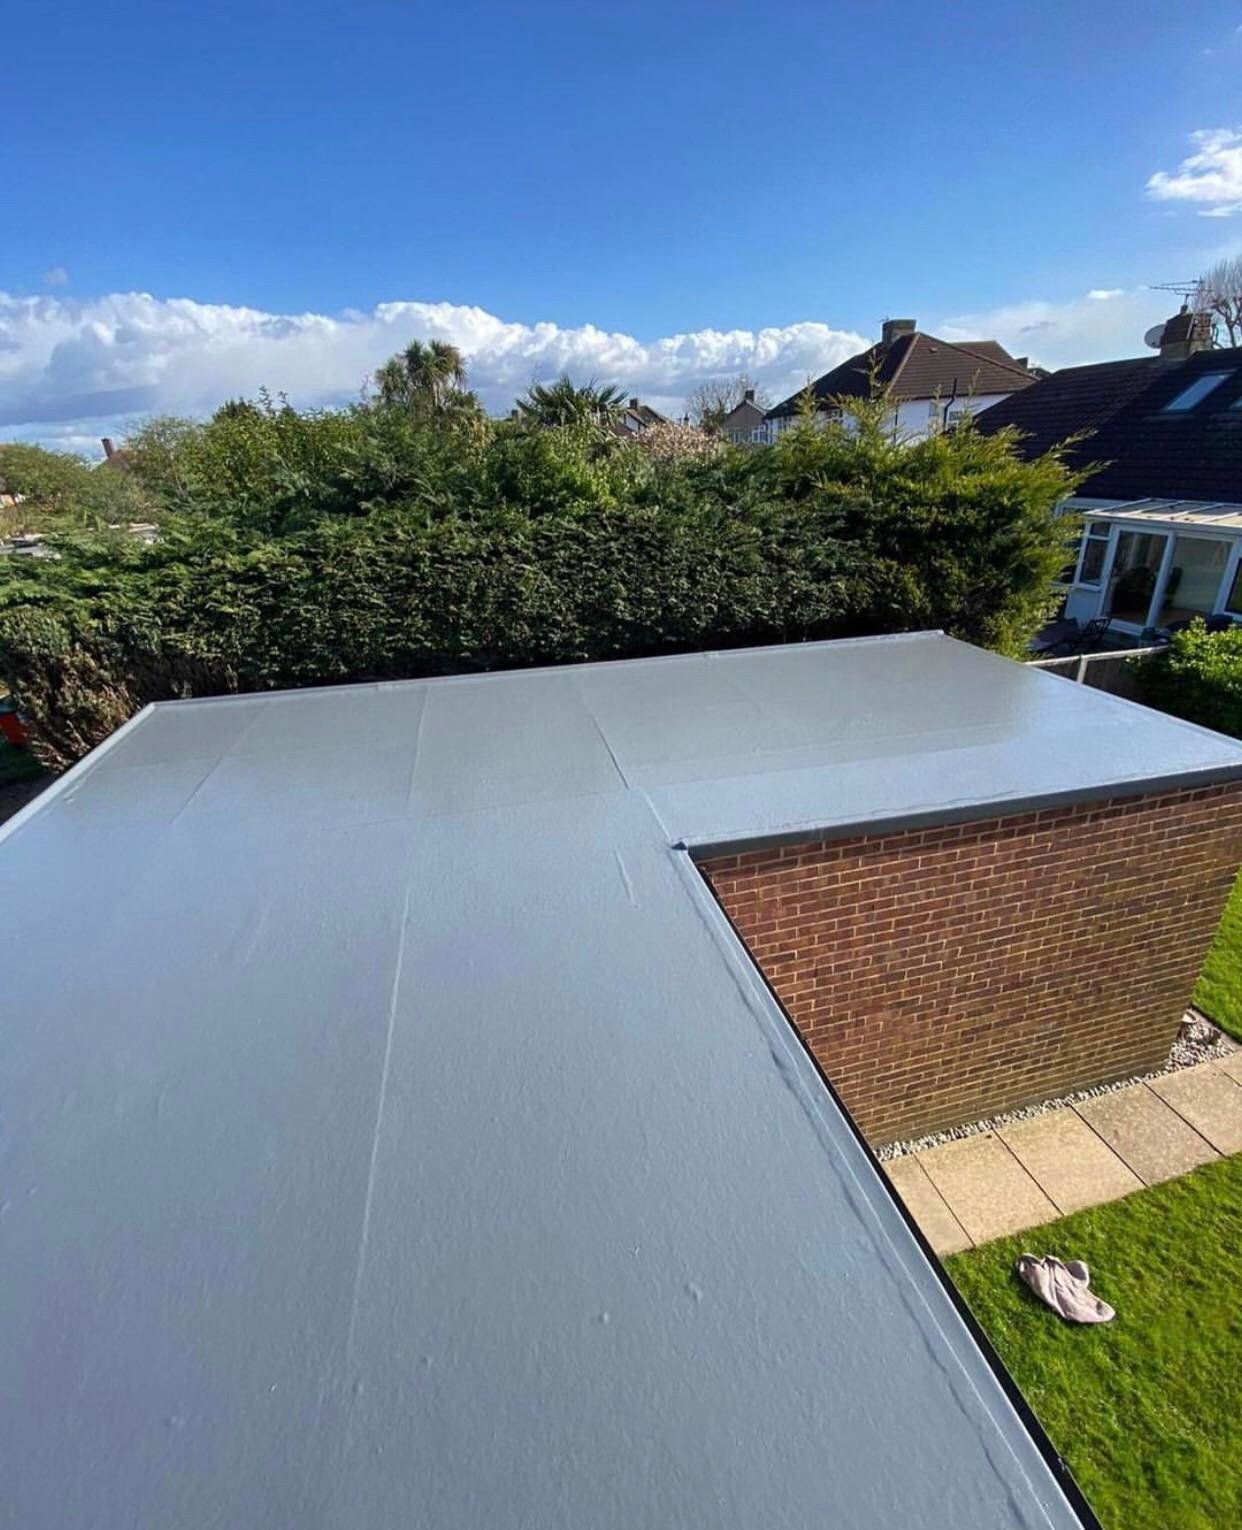 Fibre glass roofing